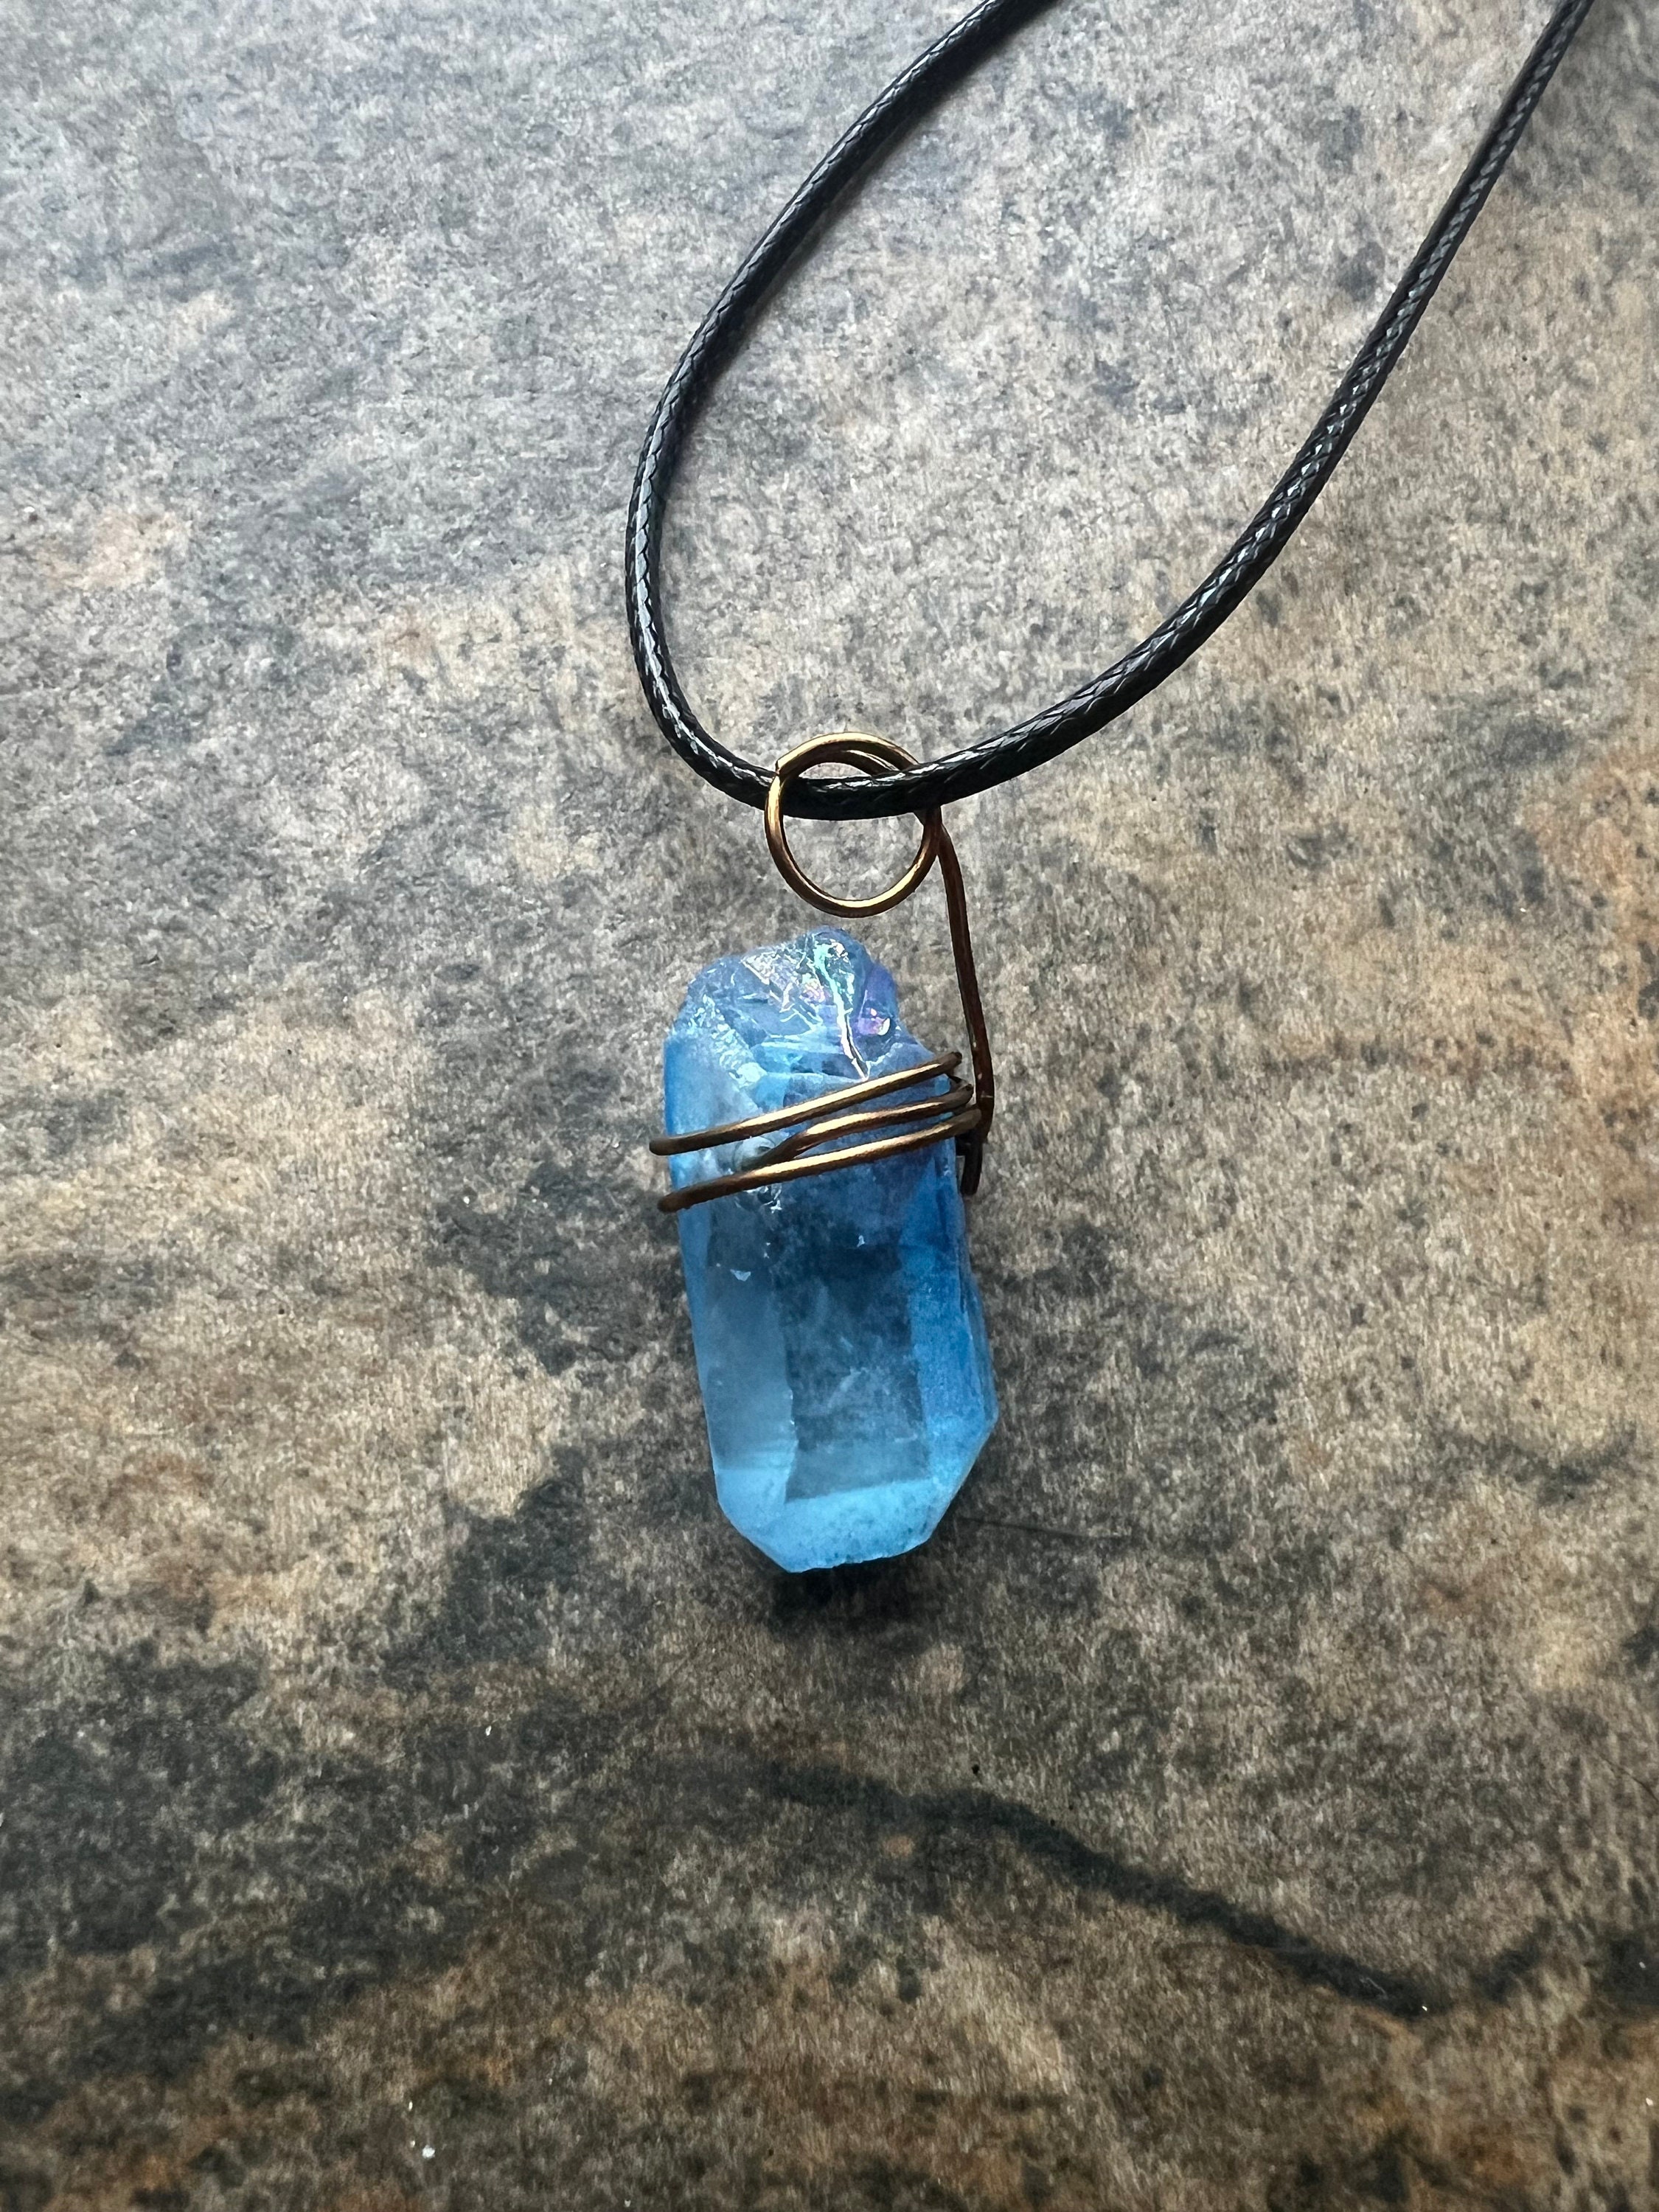 New Kyber Crystal Necklaces Available at Star Wars: Galaxy's Edge in Walt  Disney World - WDW News Today